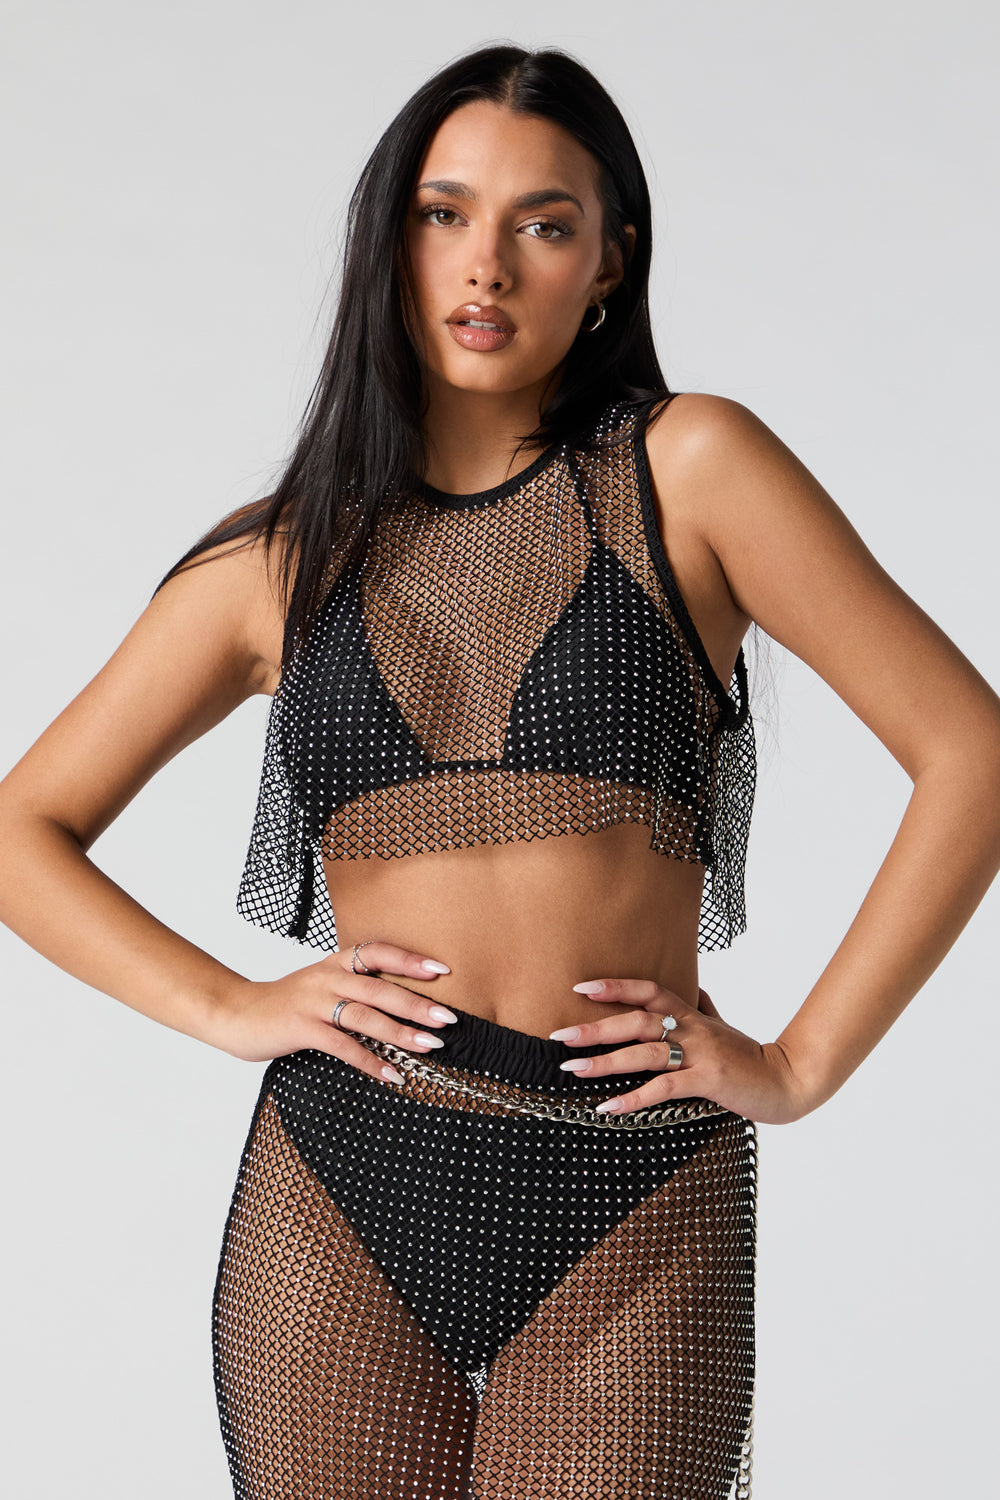 Rhinestone Fishnet Cropped Tank Cover Up Rhinestone Fishnet Cropped Tank Cover Up 6